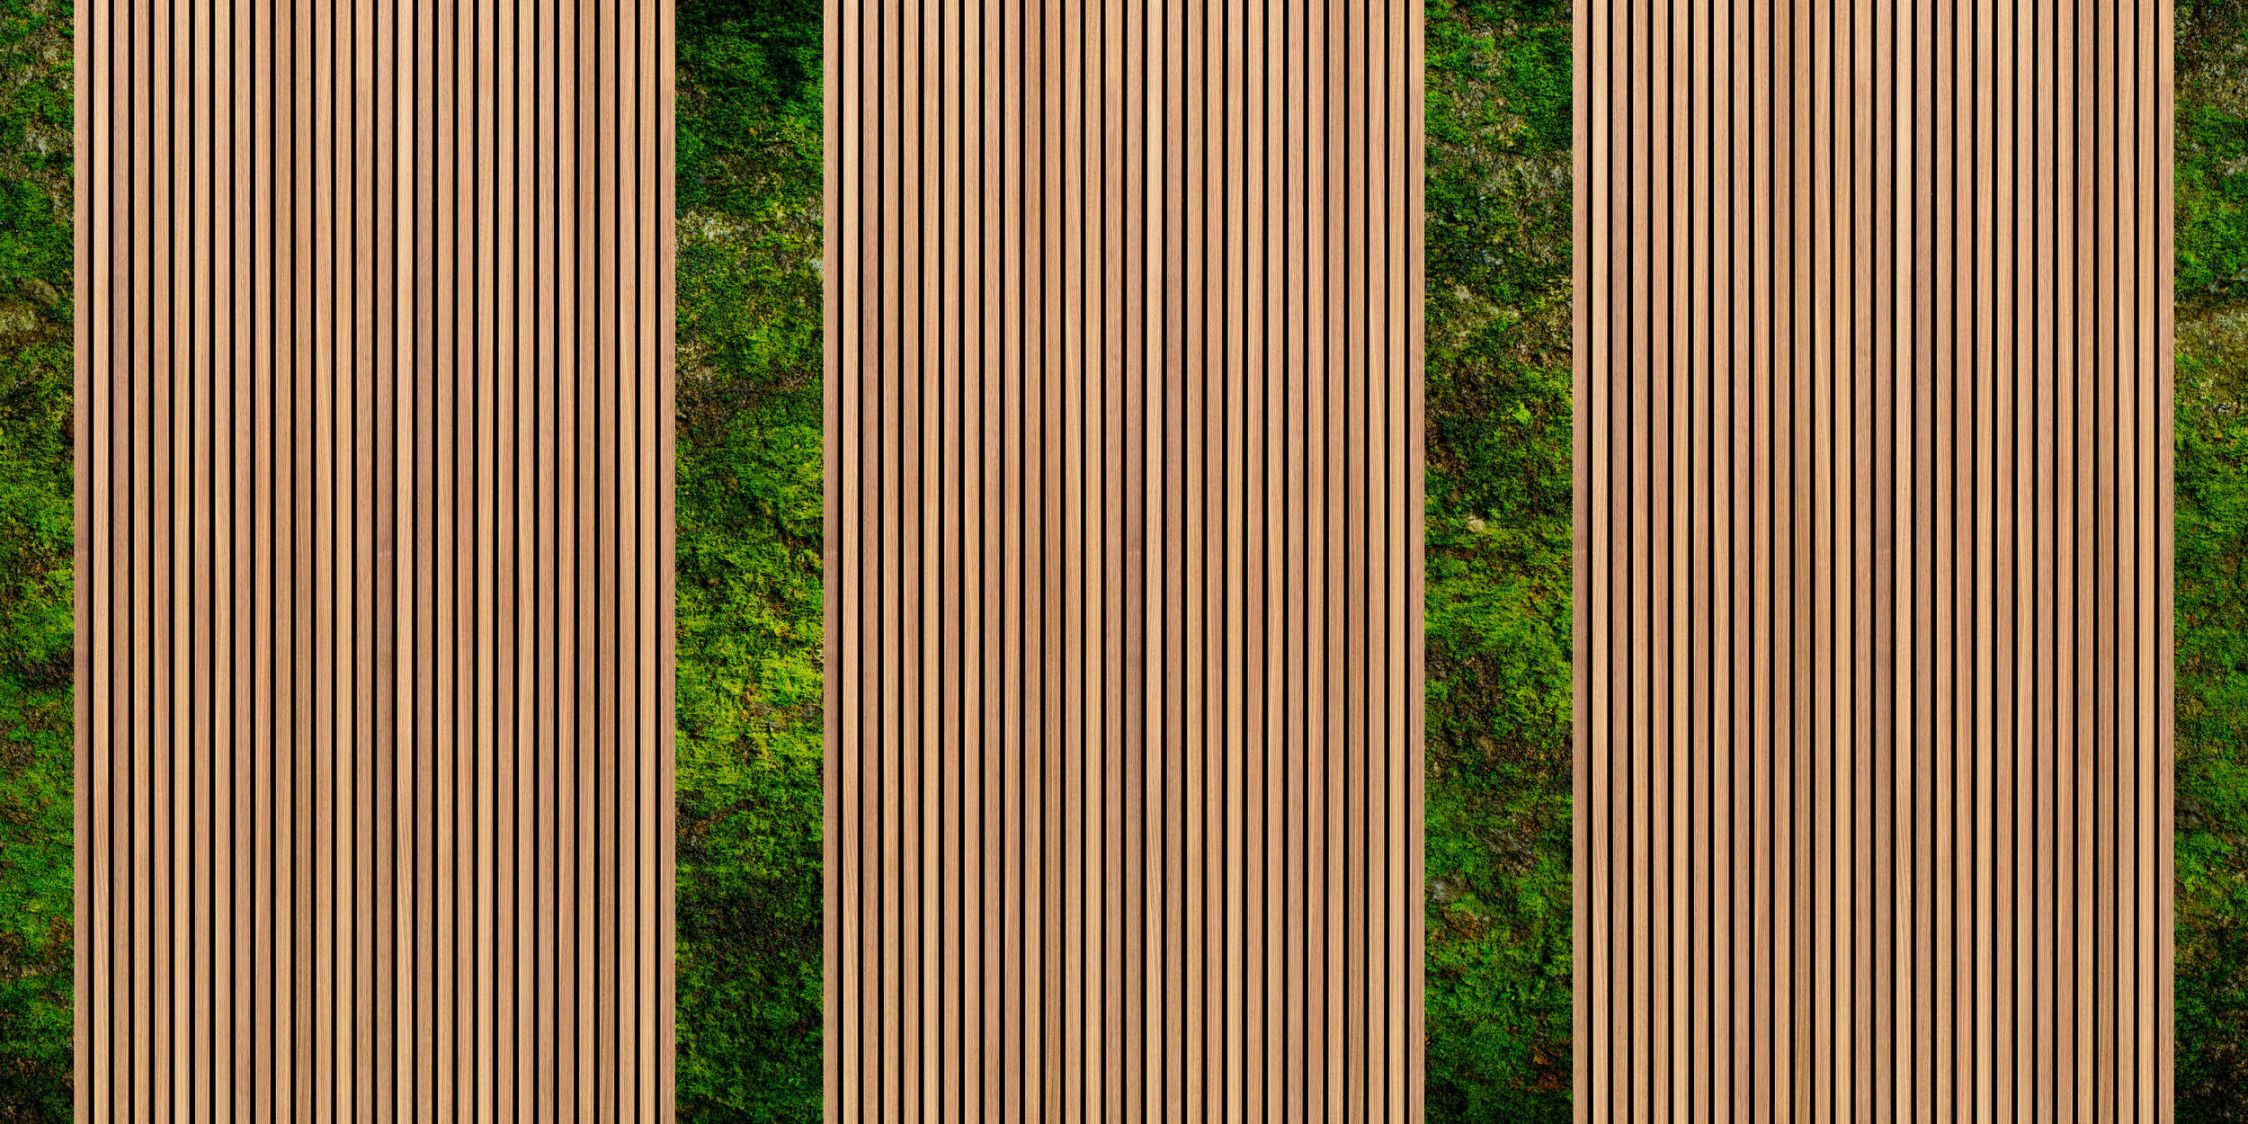             Photo wallpaper »panel 2« - Wide wood panels & moss - Smooth, slightly pearlescent non-woven fabric
        